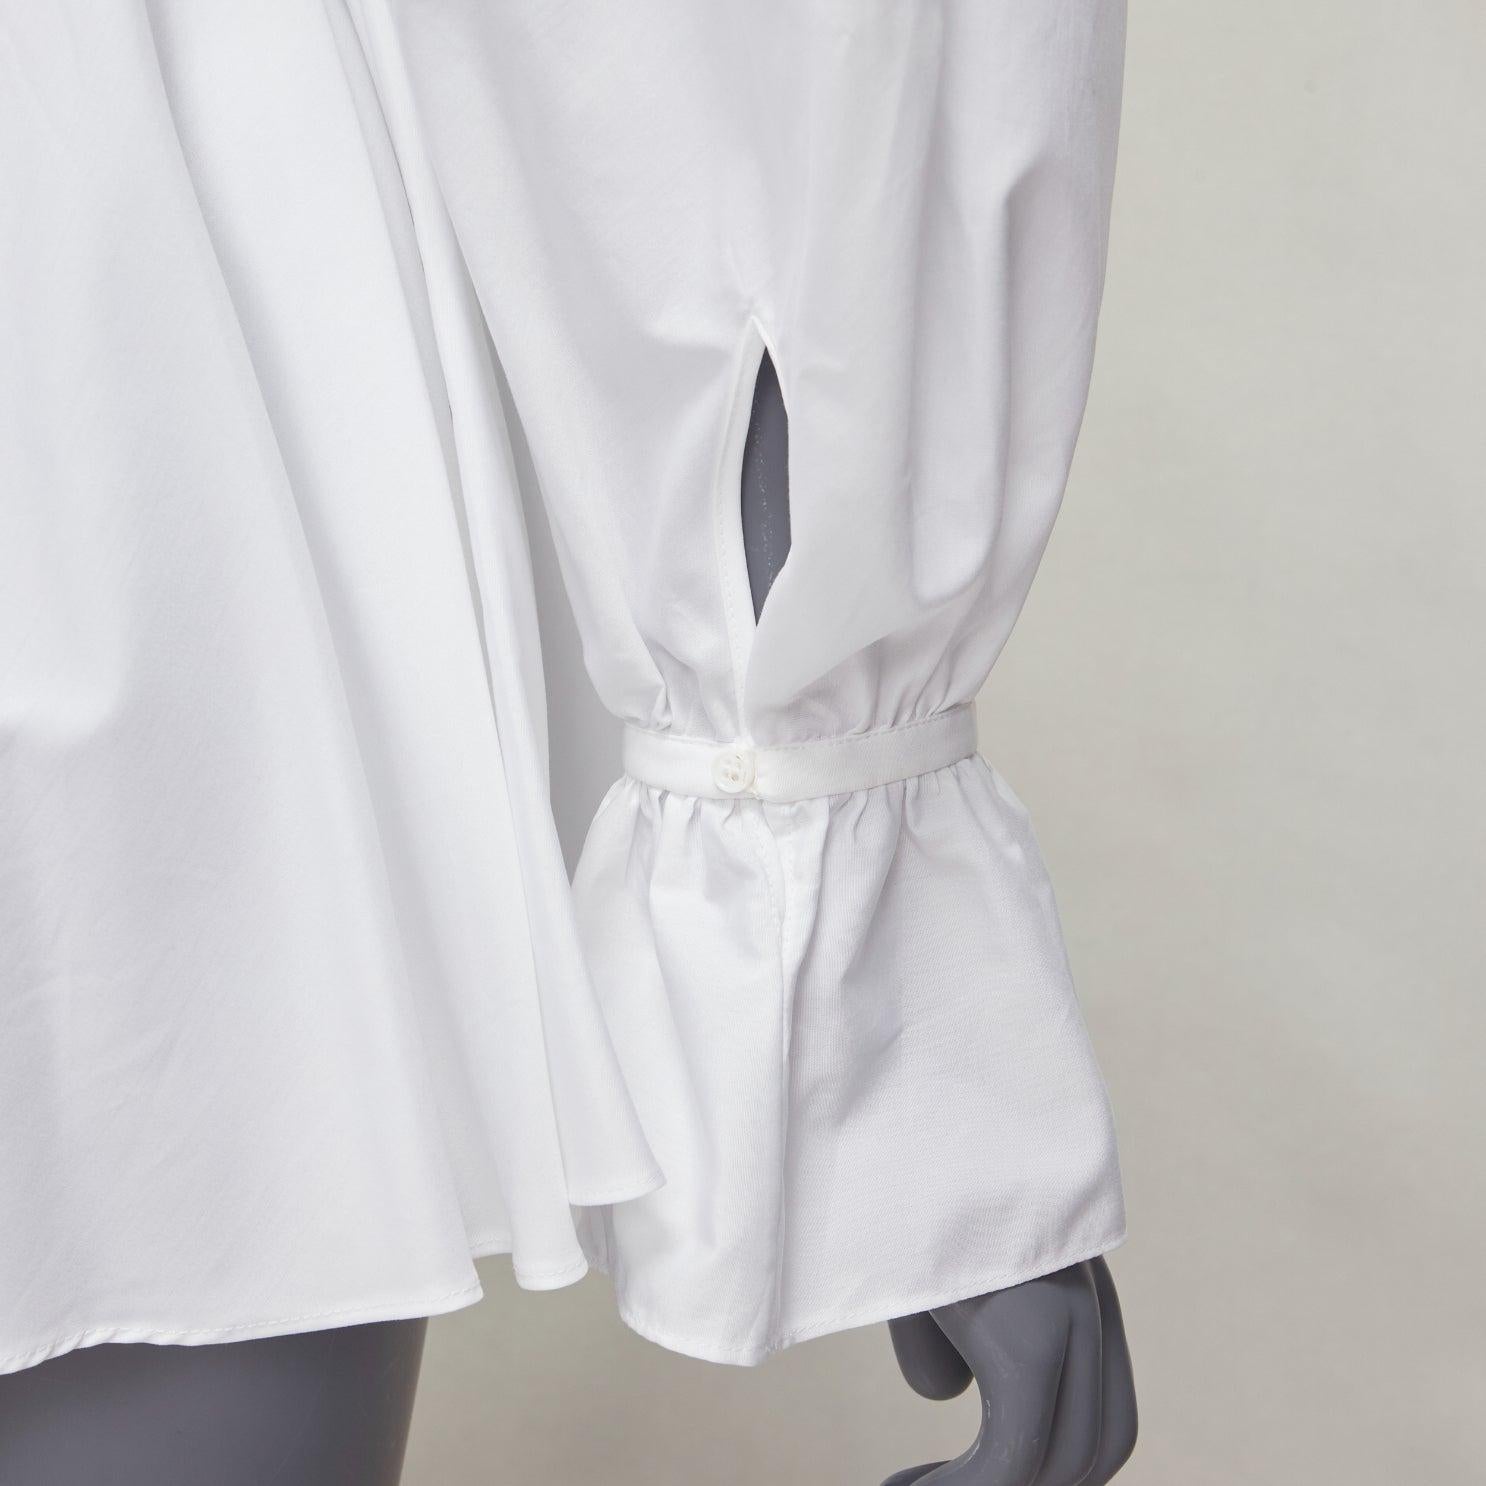 ALEXANDER MCQUEEN white cotton V-neck balloon sleeve peplum dress shirt IT38 XS
Reference: AAWC/A01151
Brand: Alexander McQueen
Designer: Sarah Burton
Material: Cotton
Color: White
Pattern: Solid
Closure: Button
Made in: Italy

CONDITION:
Condition: